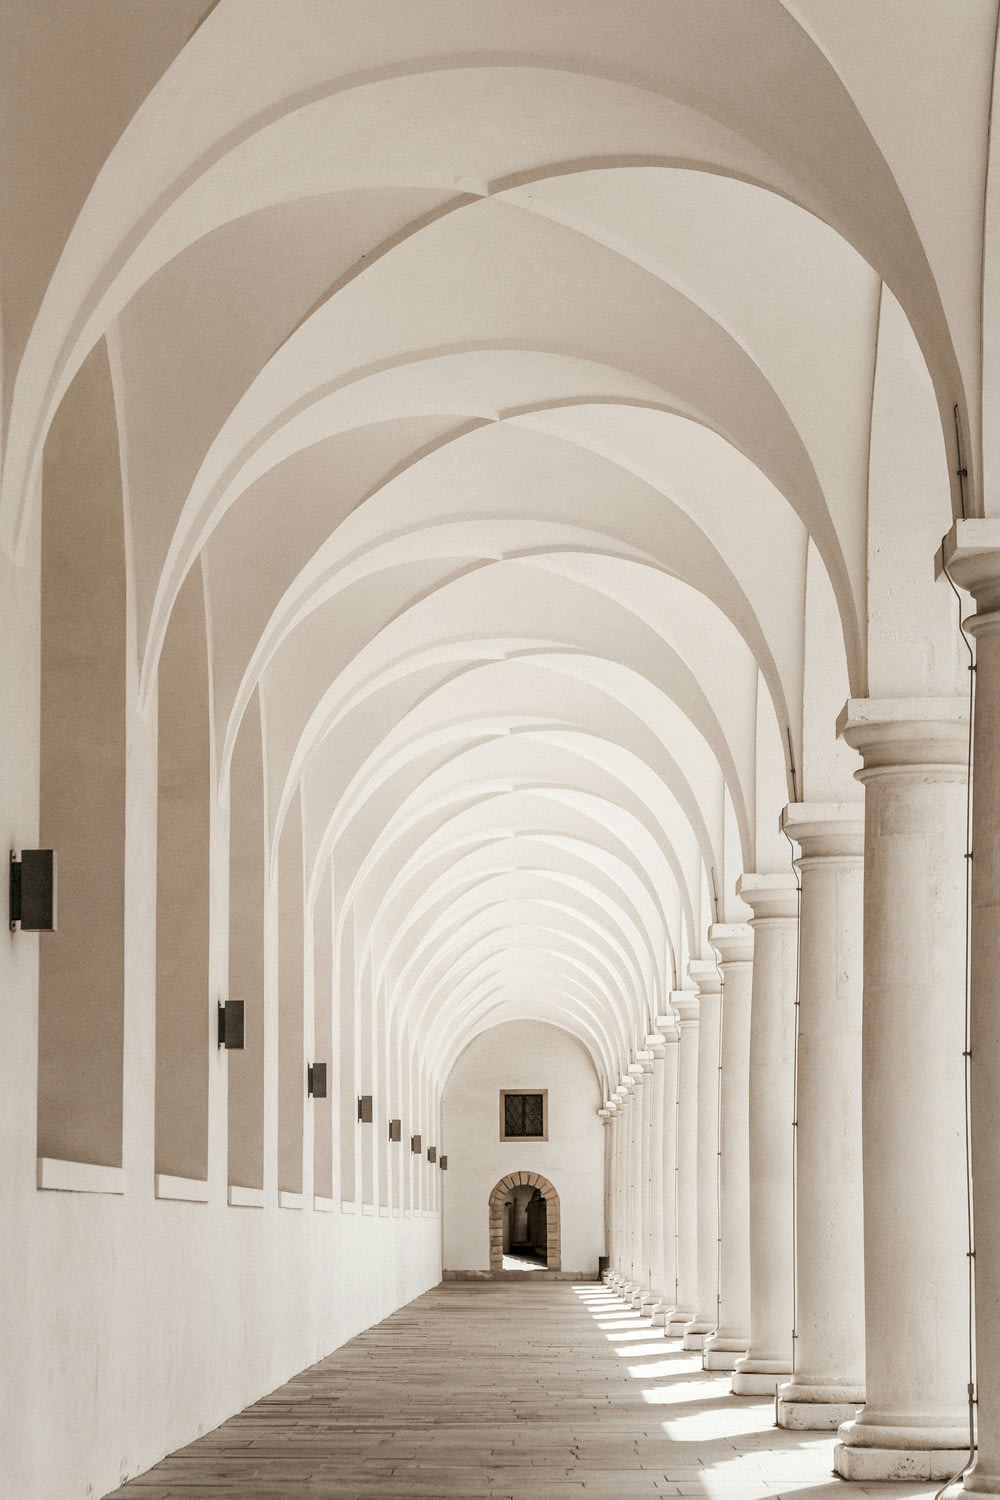 a long hallway with arches and columns on both sides